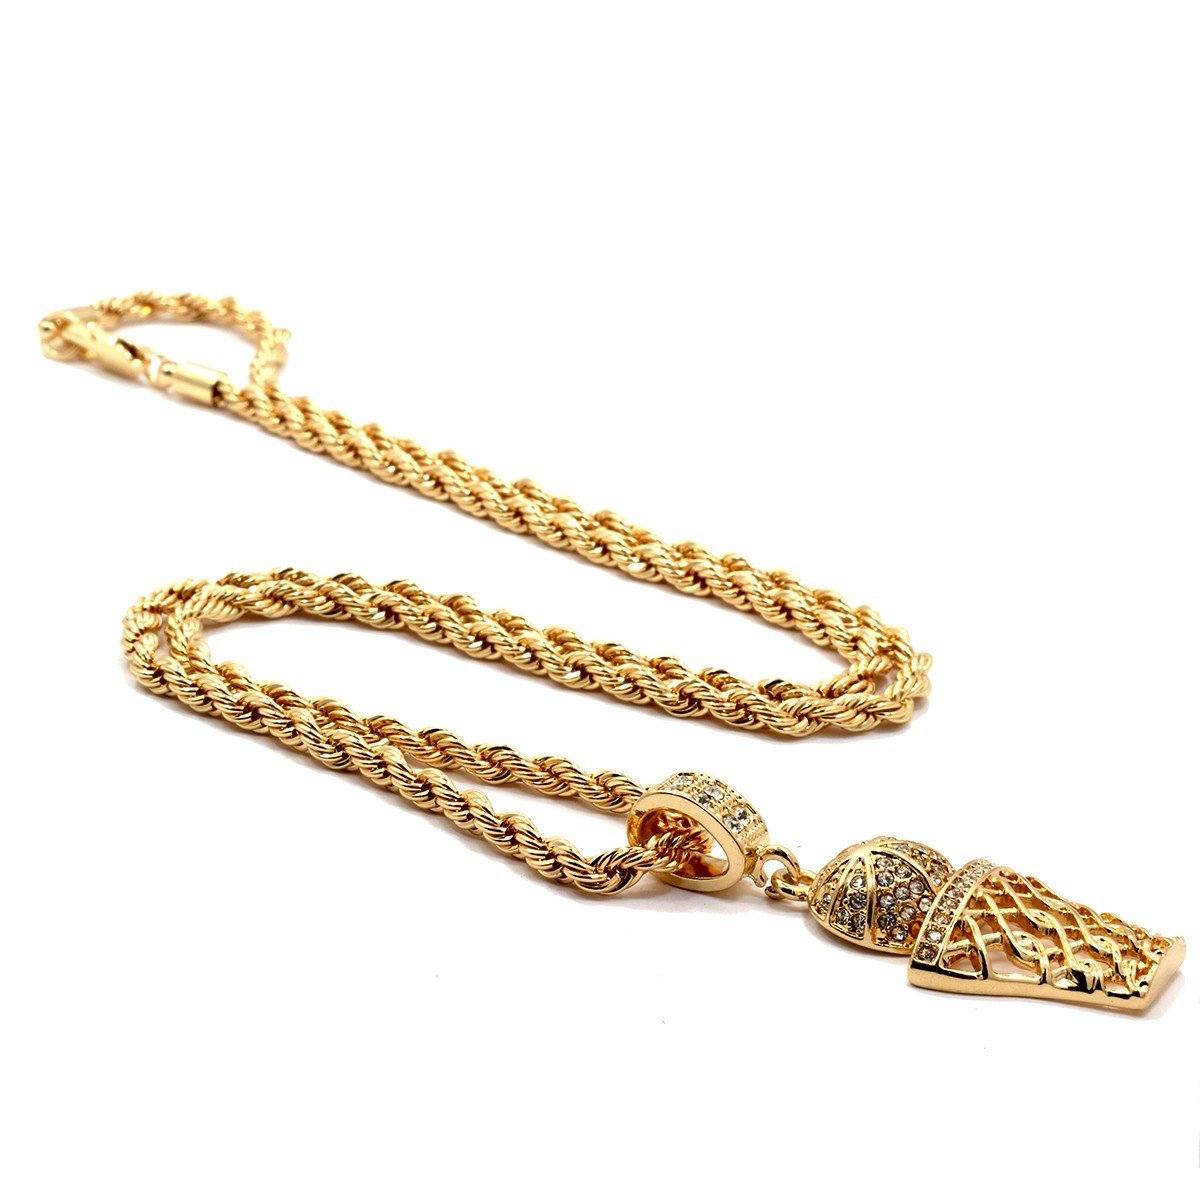 BASKET BALL PENDANT WITH GOLD ROPE CHAIN